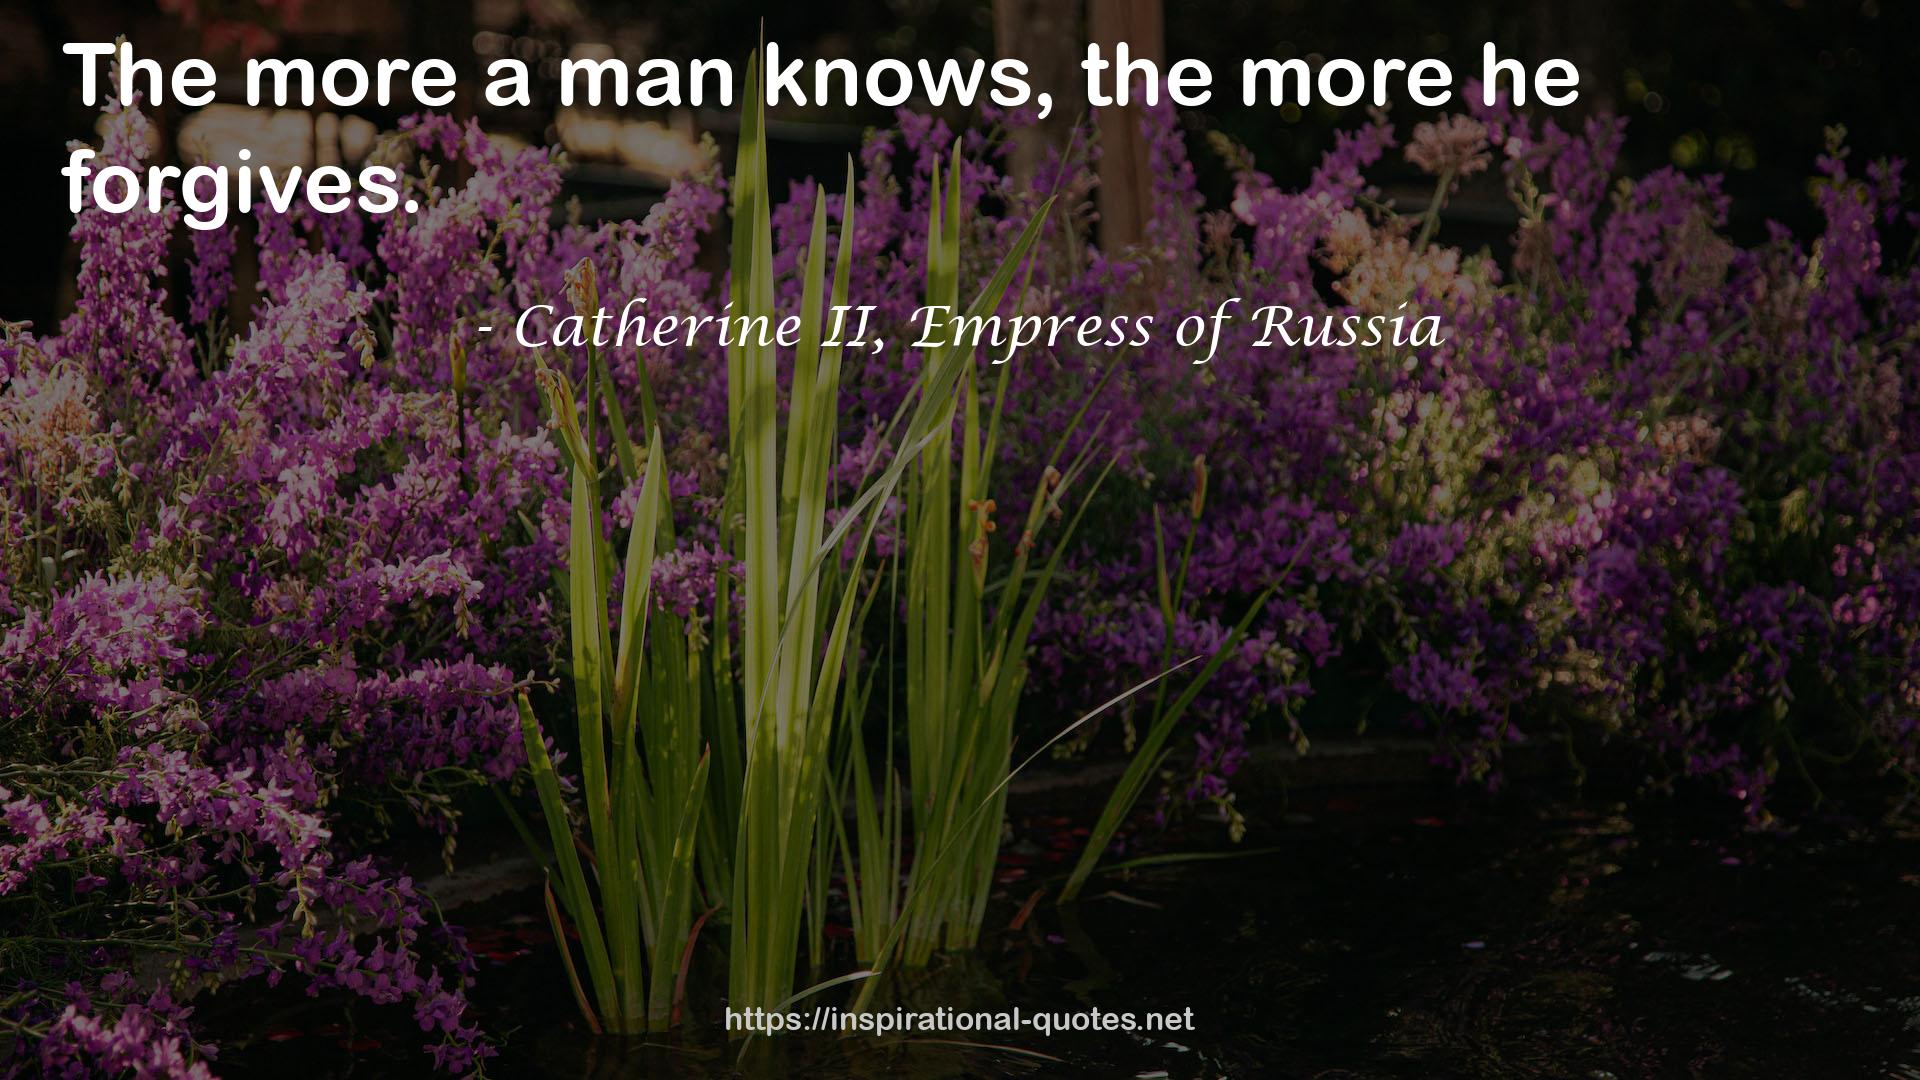 Catherine II, Empress of Russia QUOTES